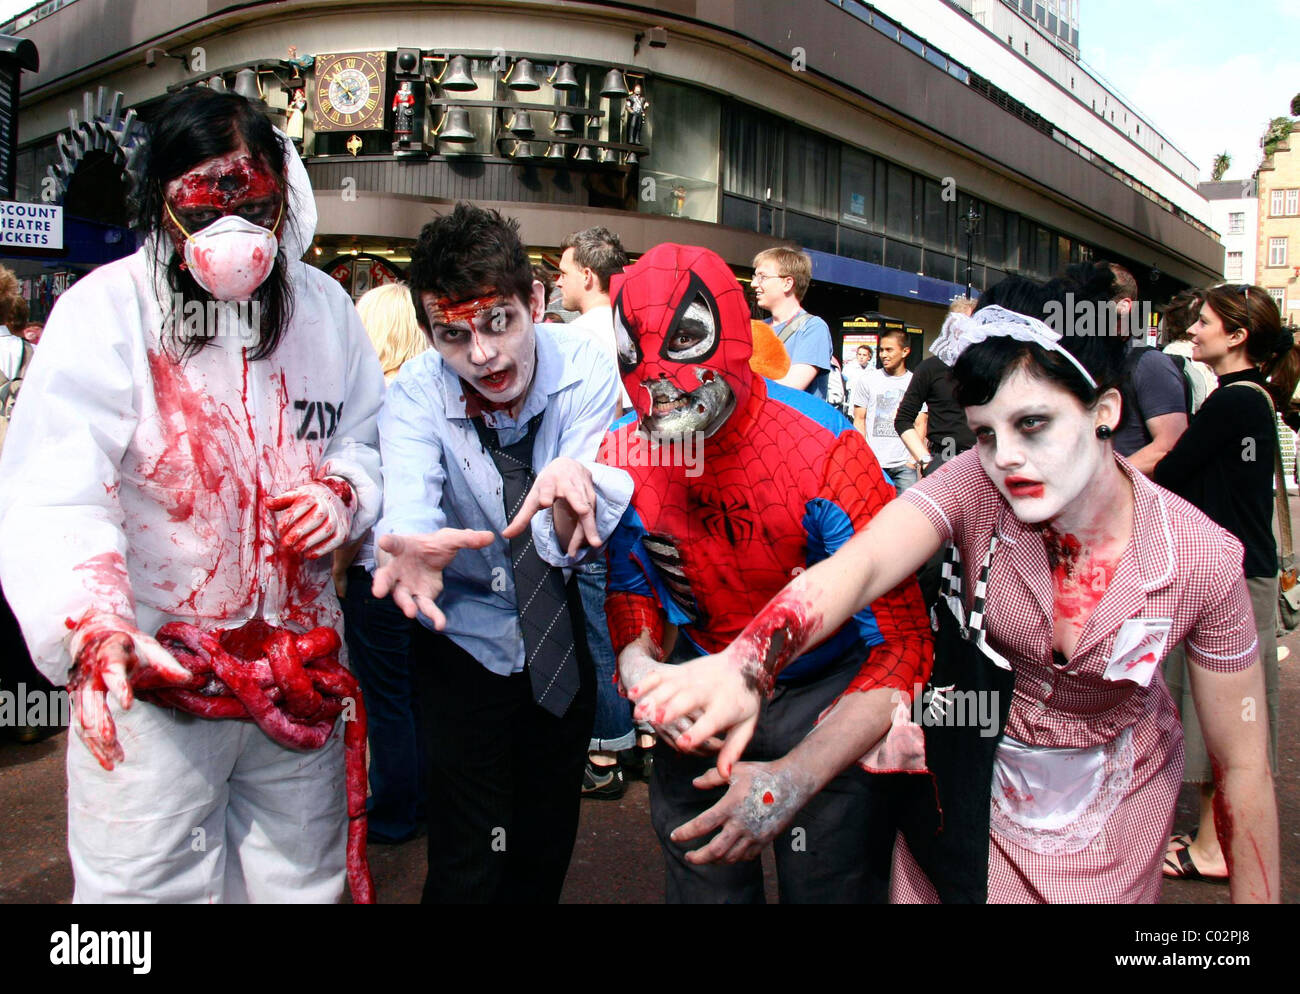 Atmosphere Fright Fest 2007, Zombie gathering Leicester Square London, England - 27.08.07 Stock Photo